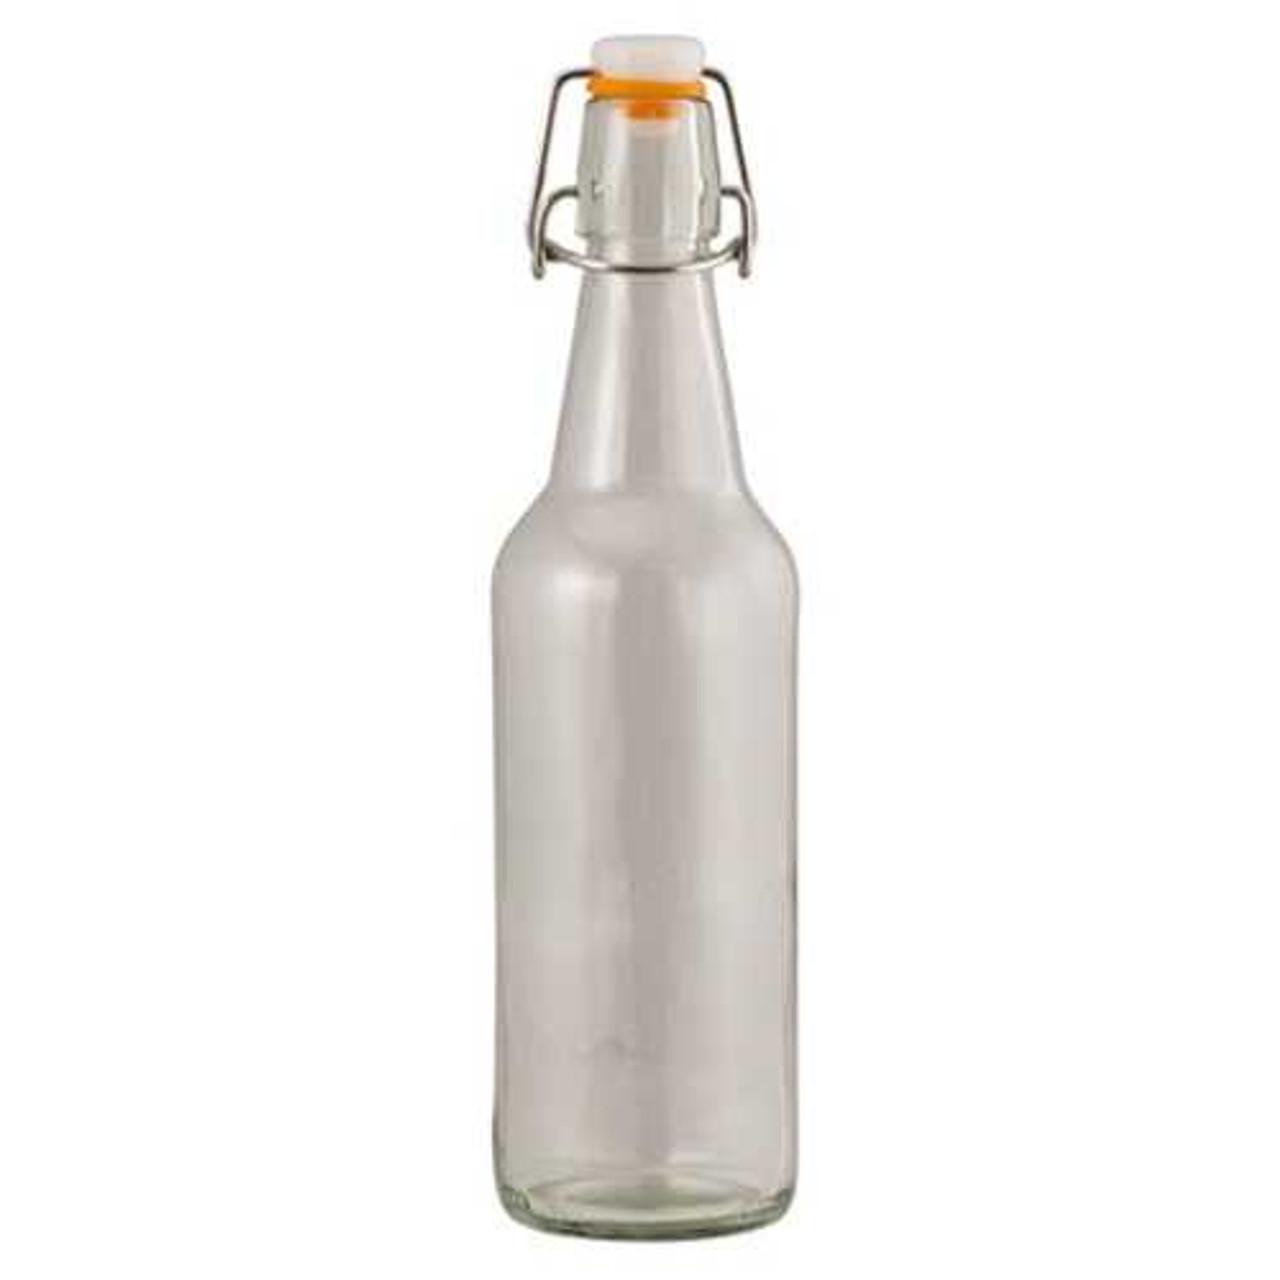 https://cdn11.bigcommerce.com/s-1ybtx/images/stencil/1280x1280/products/1274/6696/12-oz-Round-Clear-Glass-Bottle-with-Swing-Top-375-ml_4233__45618.1699989094.jpg?c=2?imbypass=on